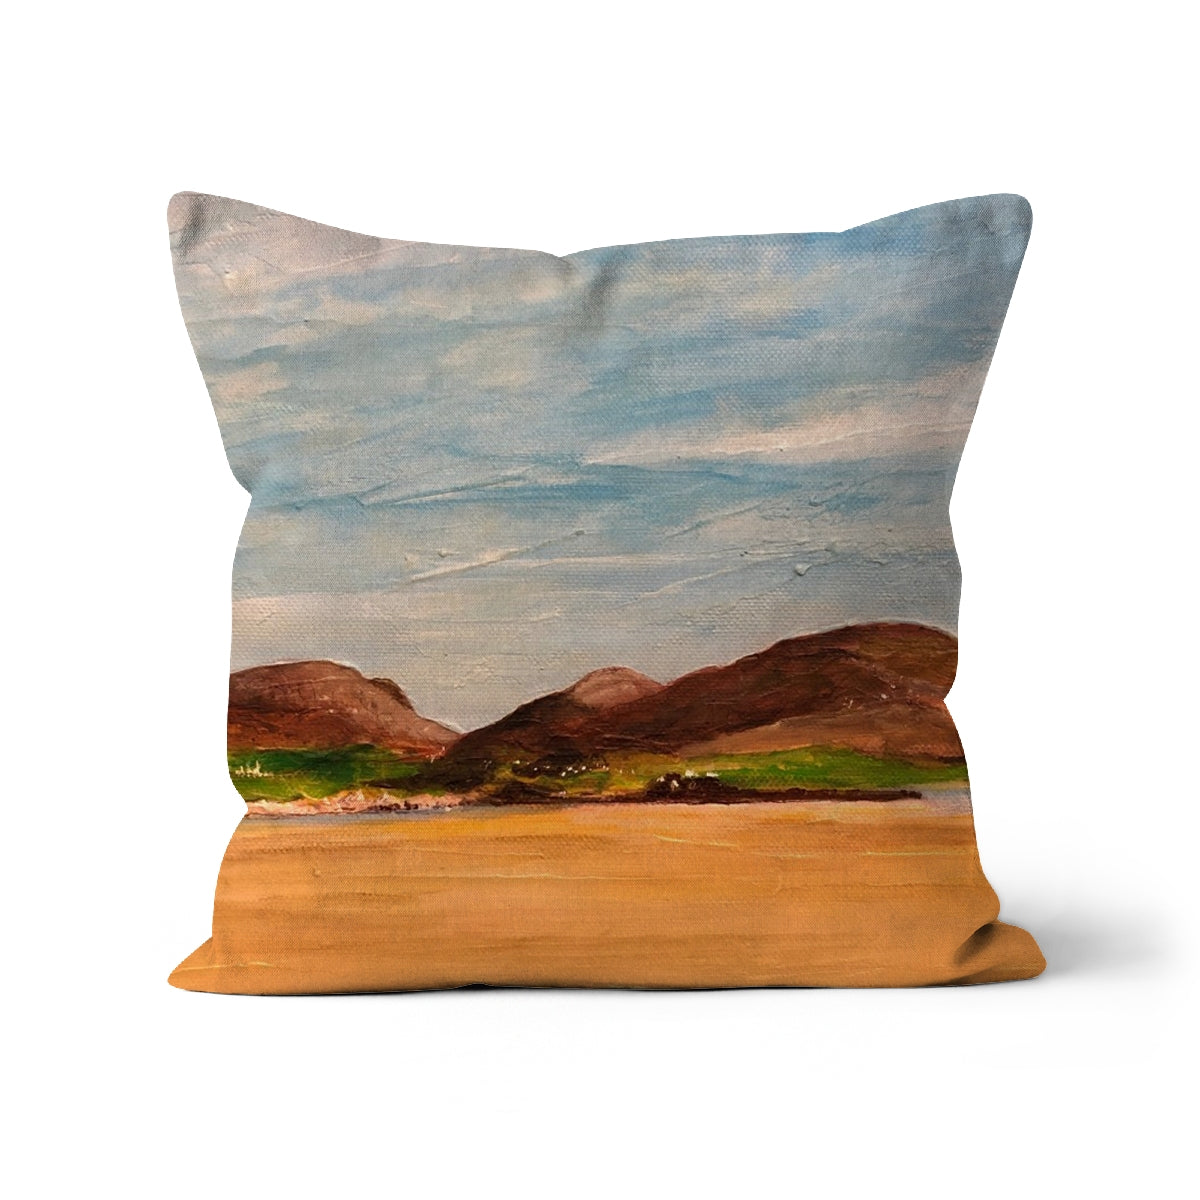 Uig Sands Lewis Art Gifts Cushion-Cushions-Hebridean Islands Art Gallery-Linen-22"x22"-Paintings, Prints, Homeware, Art Gifts From Scotland By Scottish Artist Kevin Hunter